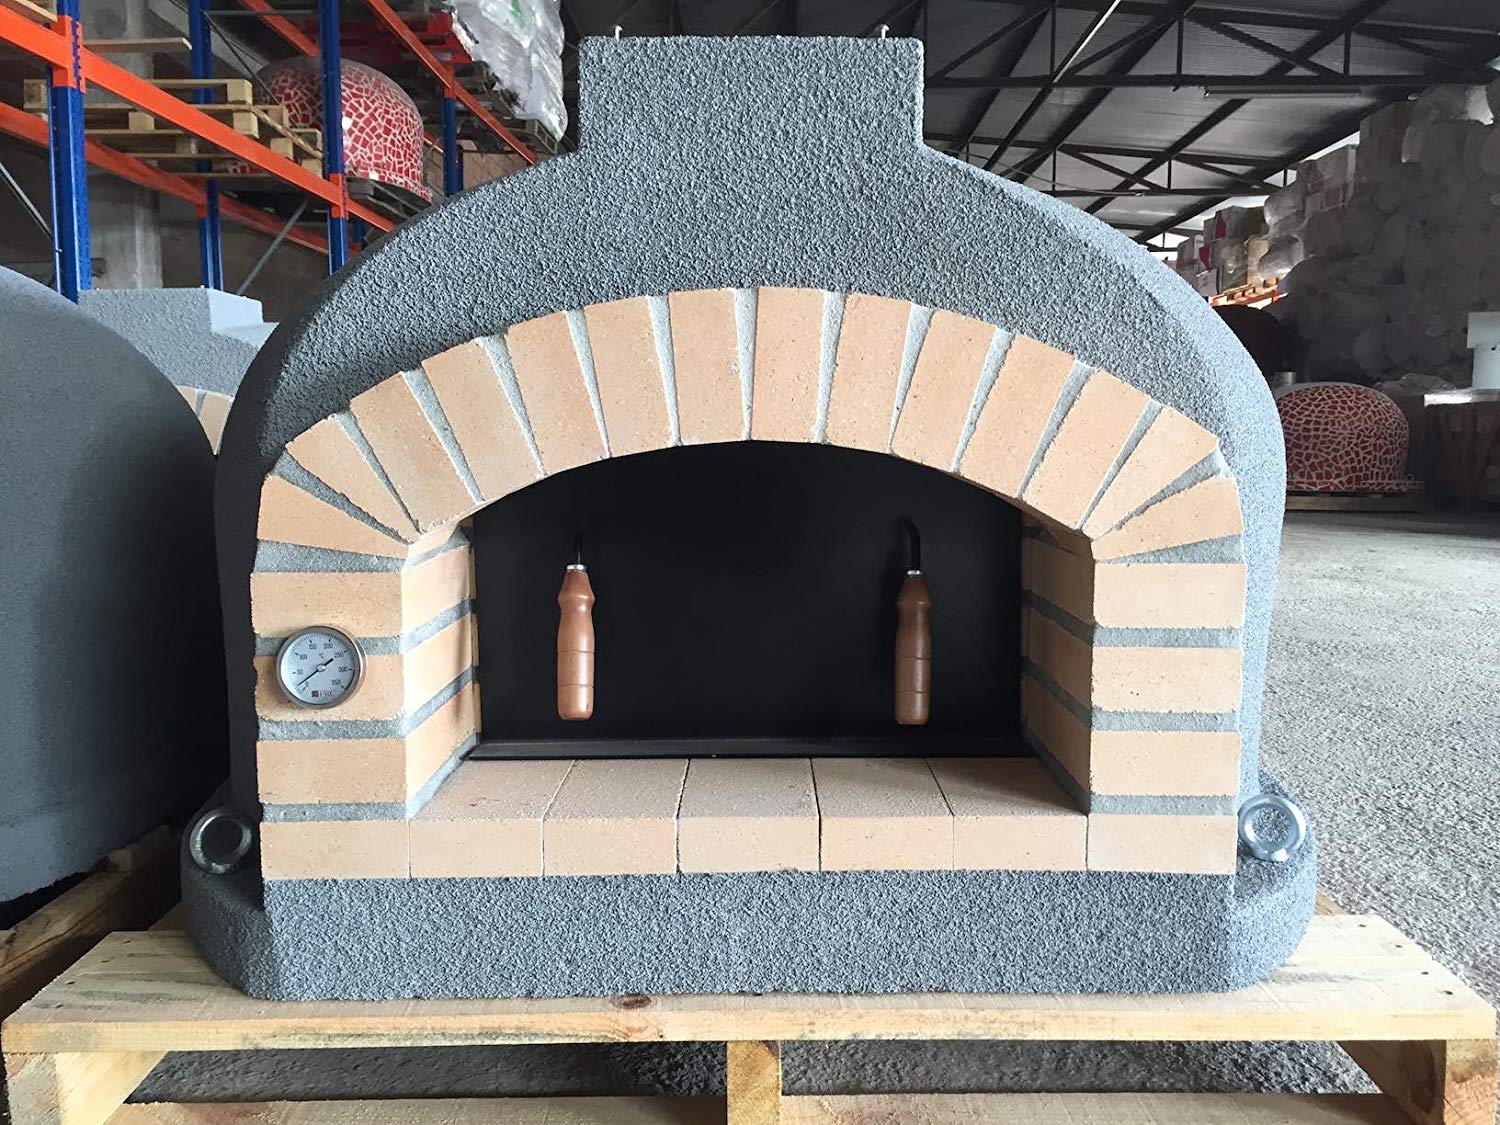 Outdoor Fireplace with Pizza Oven New Outdoor Pizza Oven Wood Fired Insulated W Brick Arch & Chimney